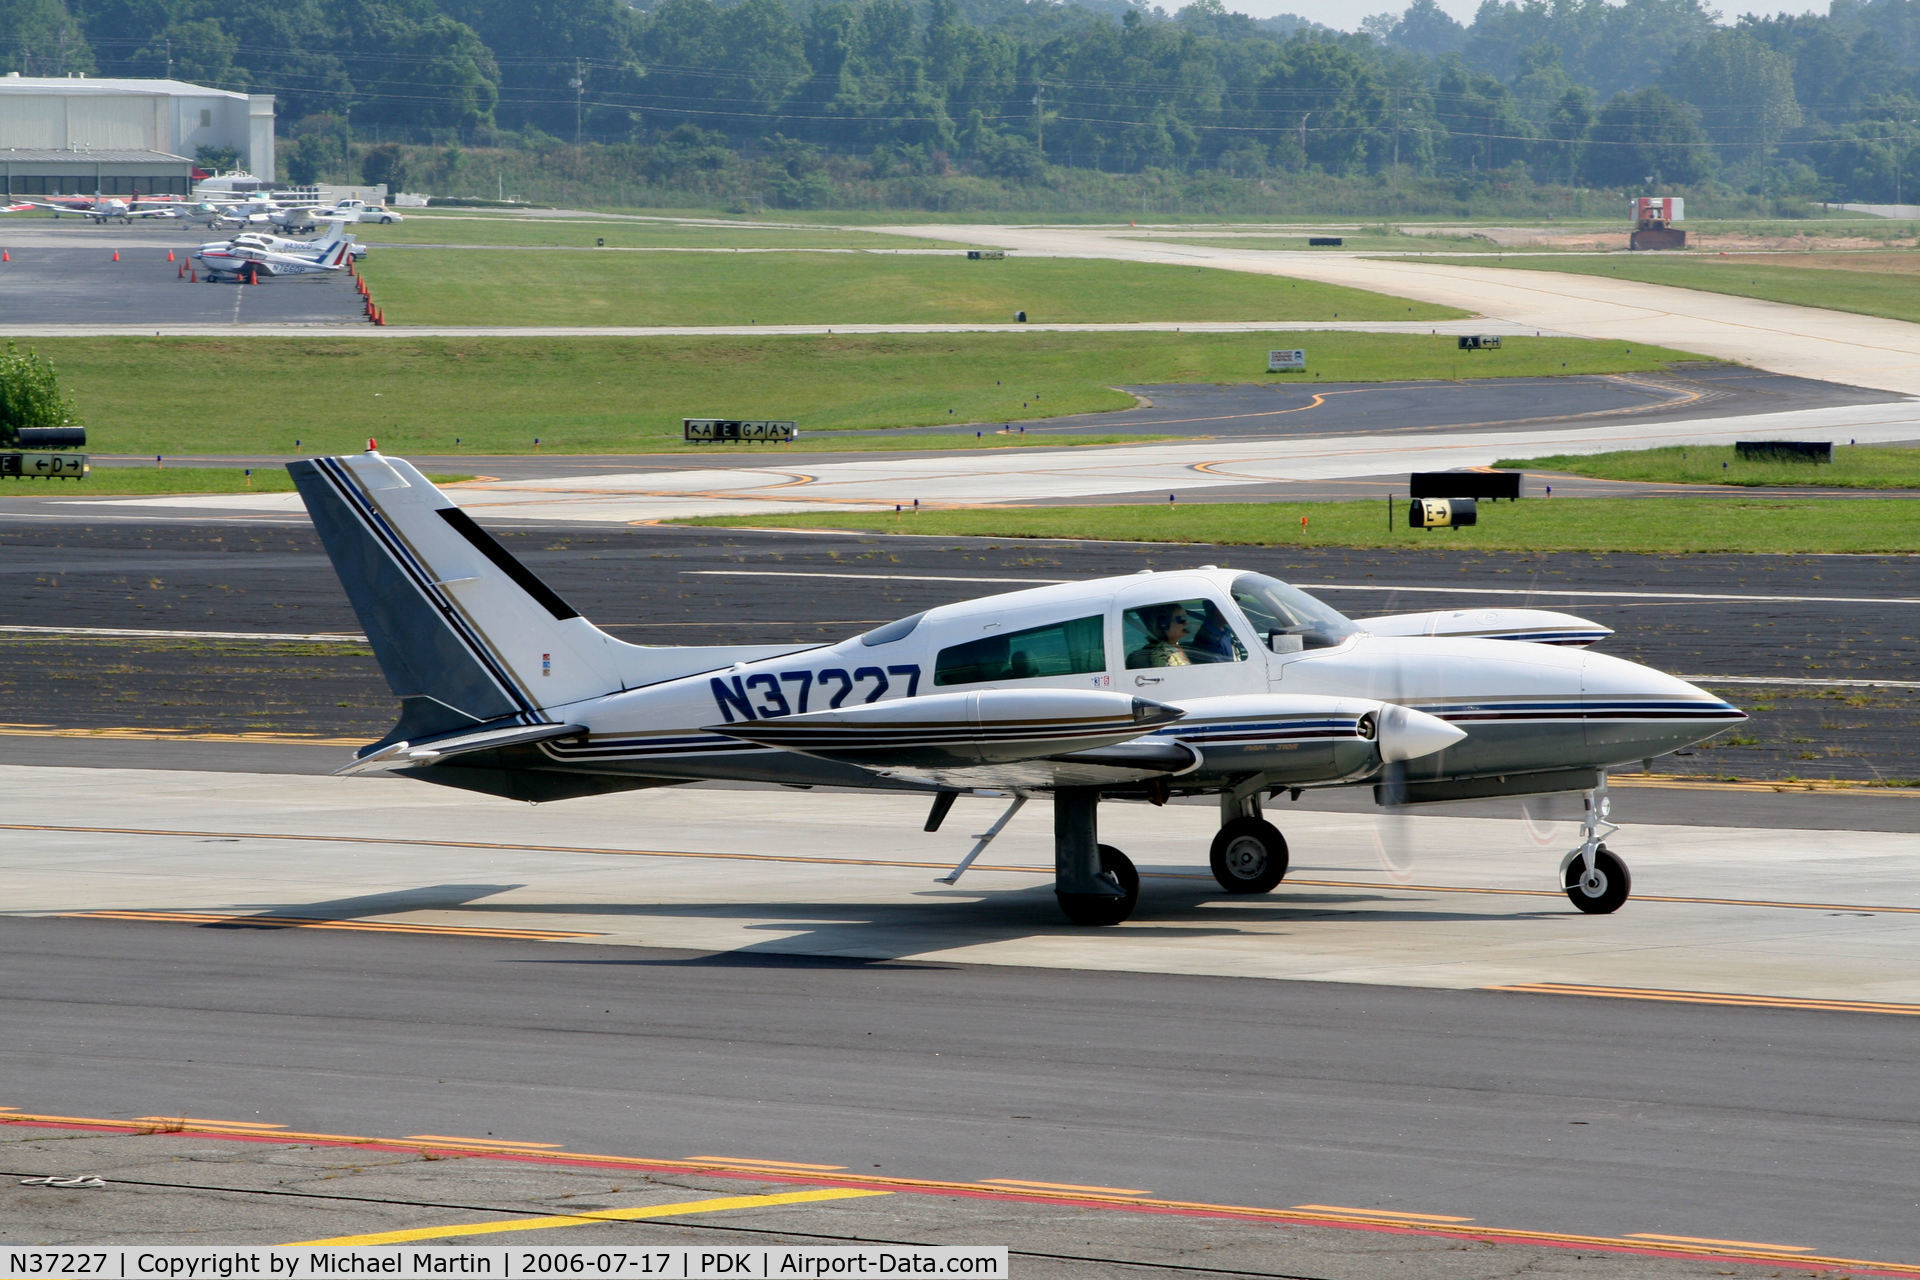 N37227, 1977 Cessna T310R C/N 310R0966, Taxing from Epps Air Service